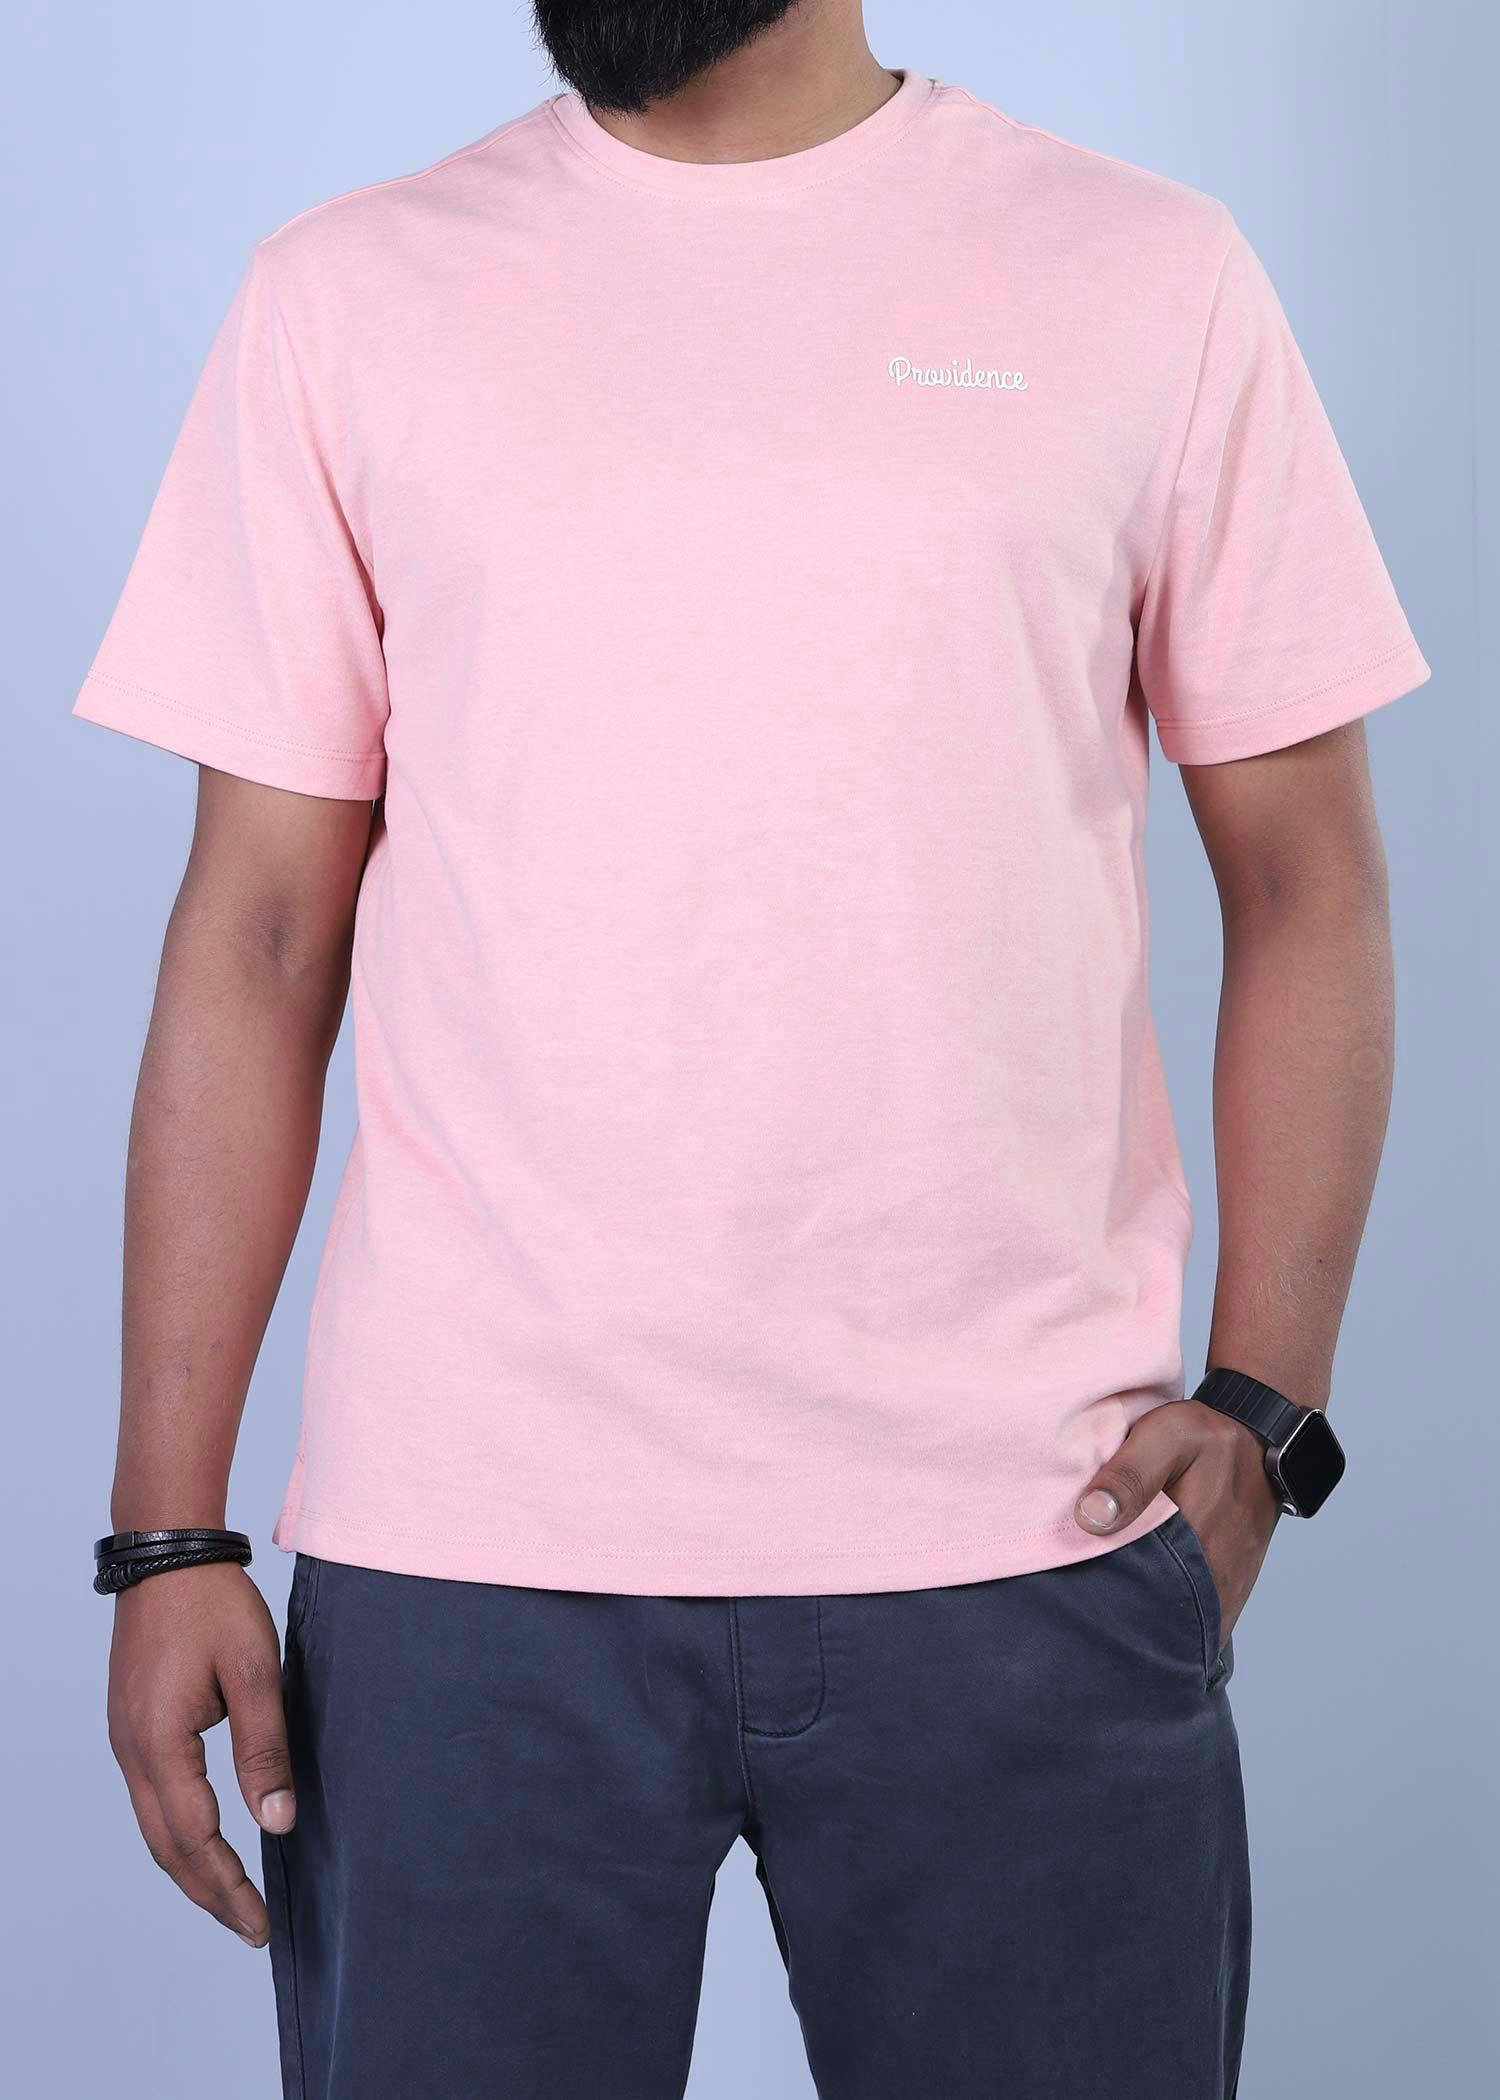 palma t shirt baby pink mealange color half front view